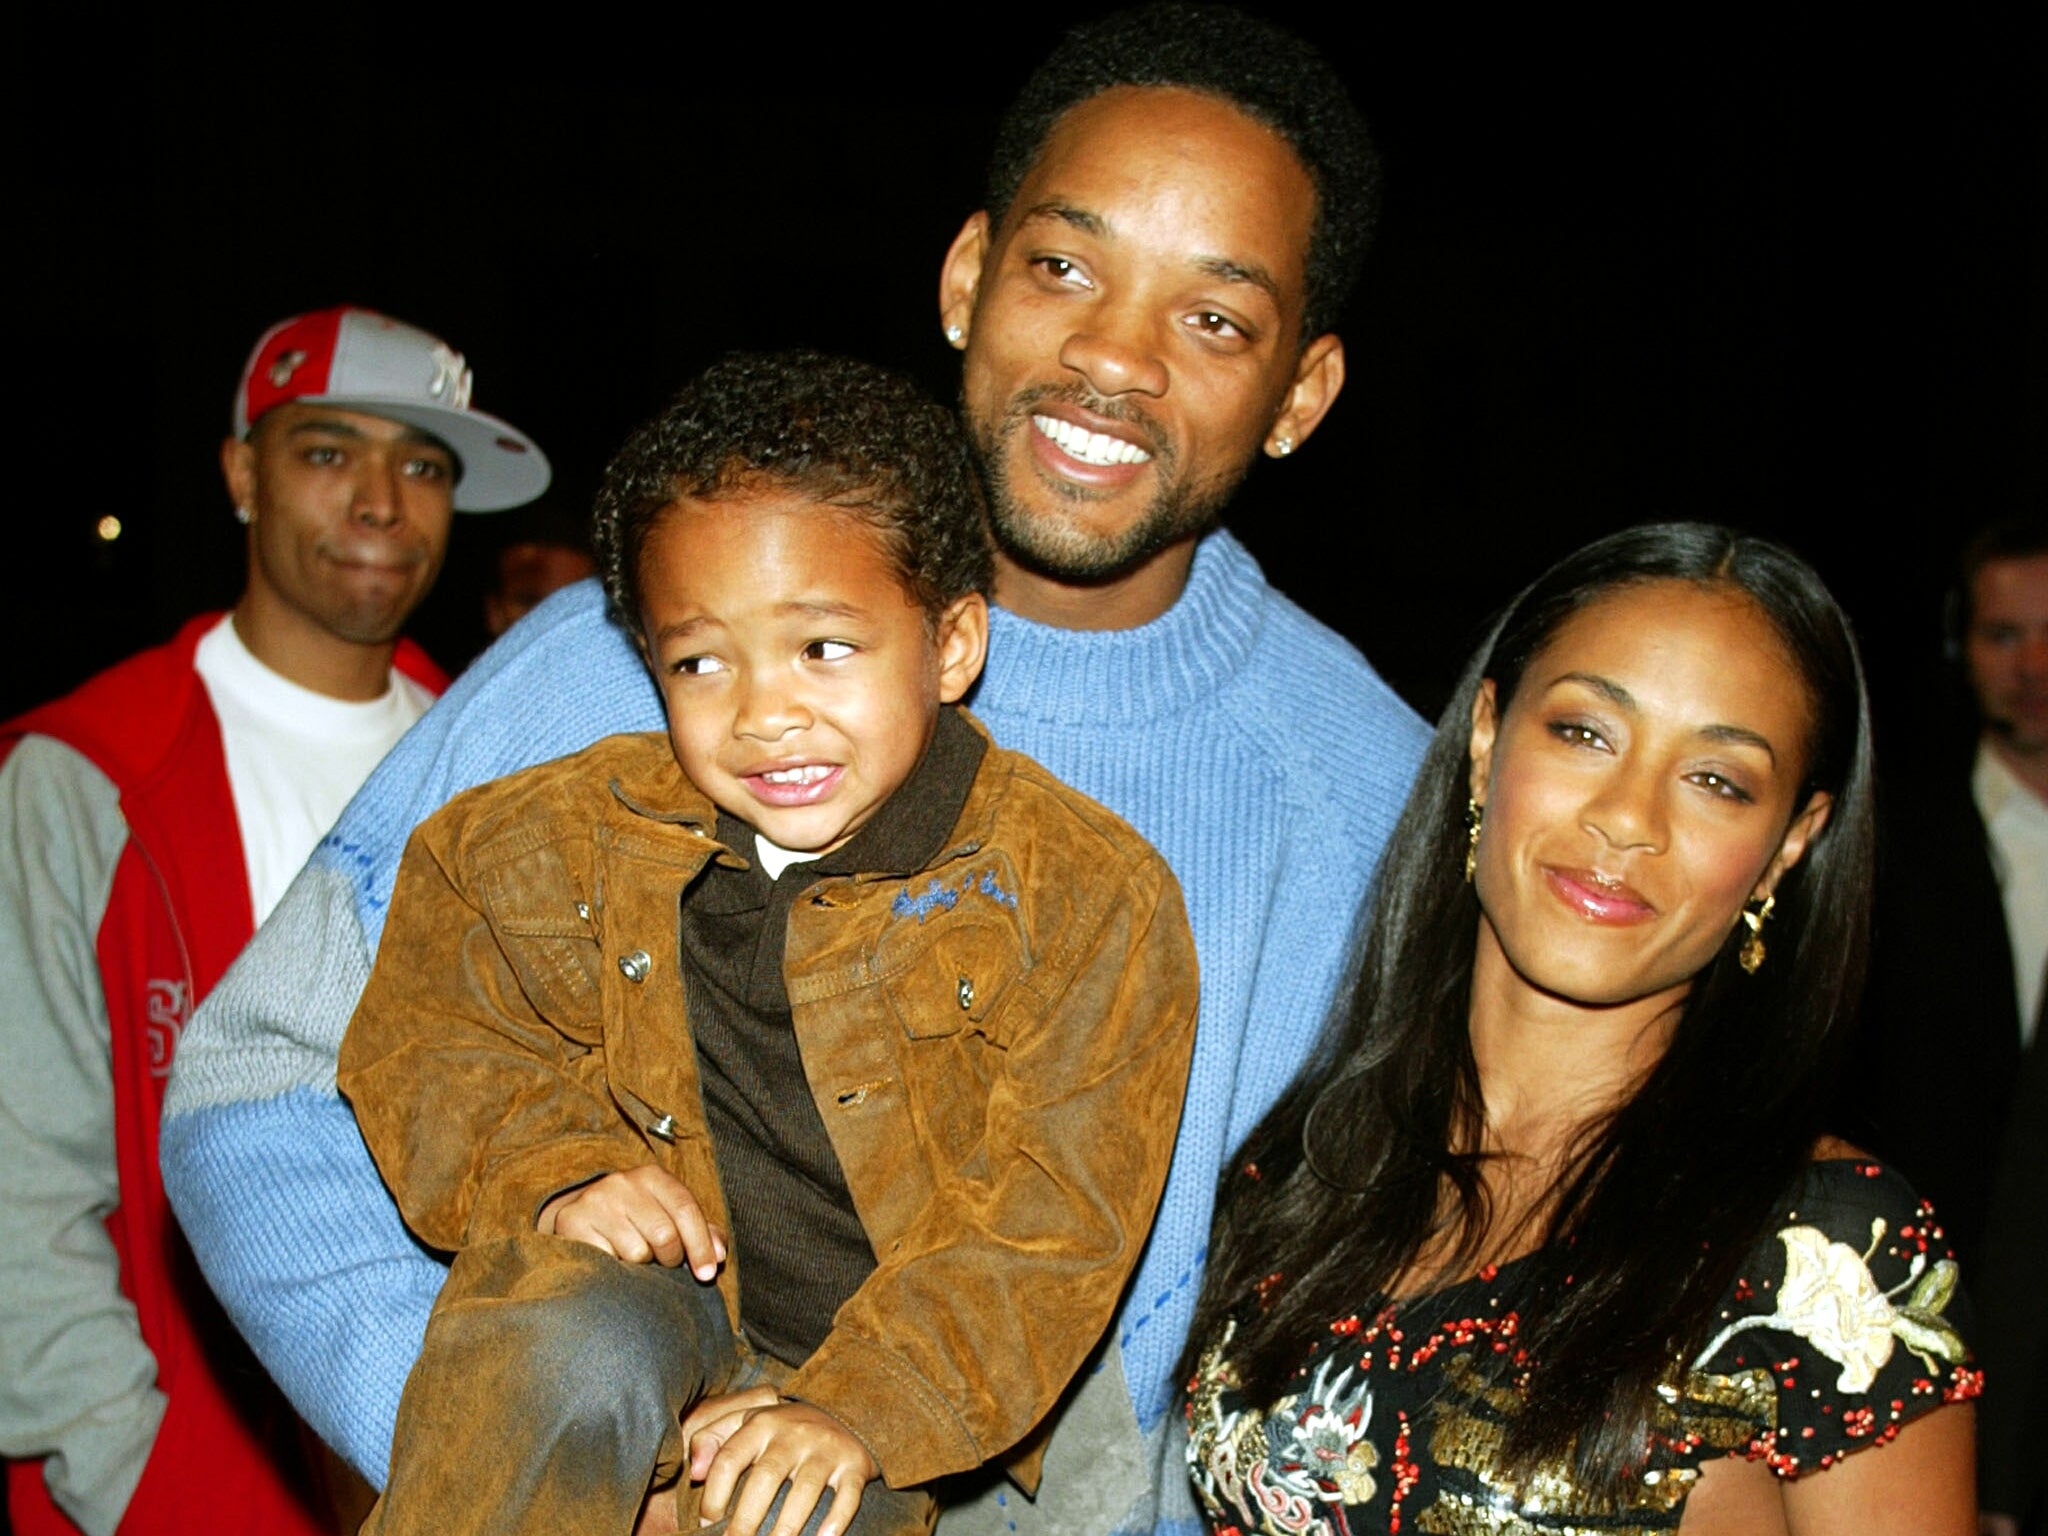 Will and Jada with their son Jayden in 2003